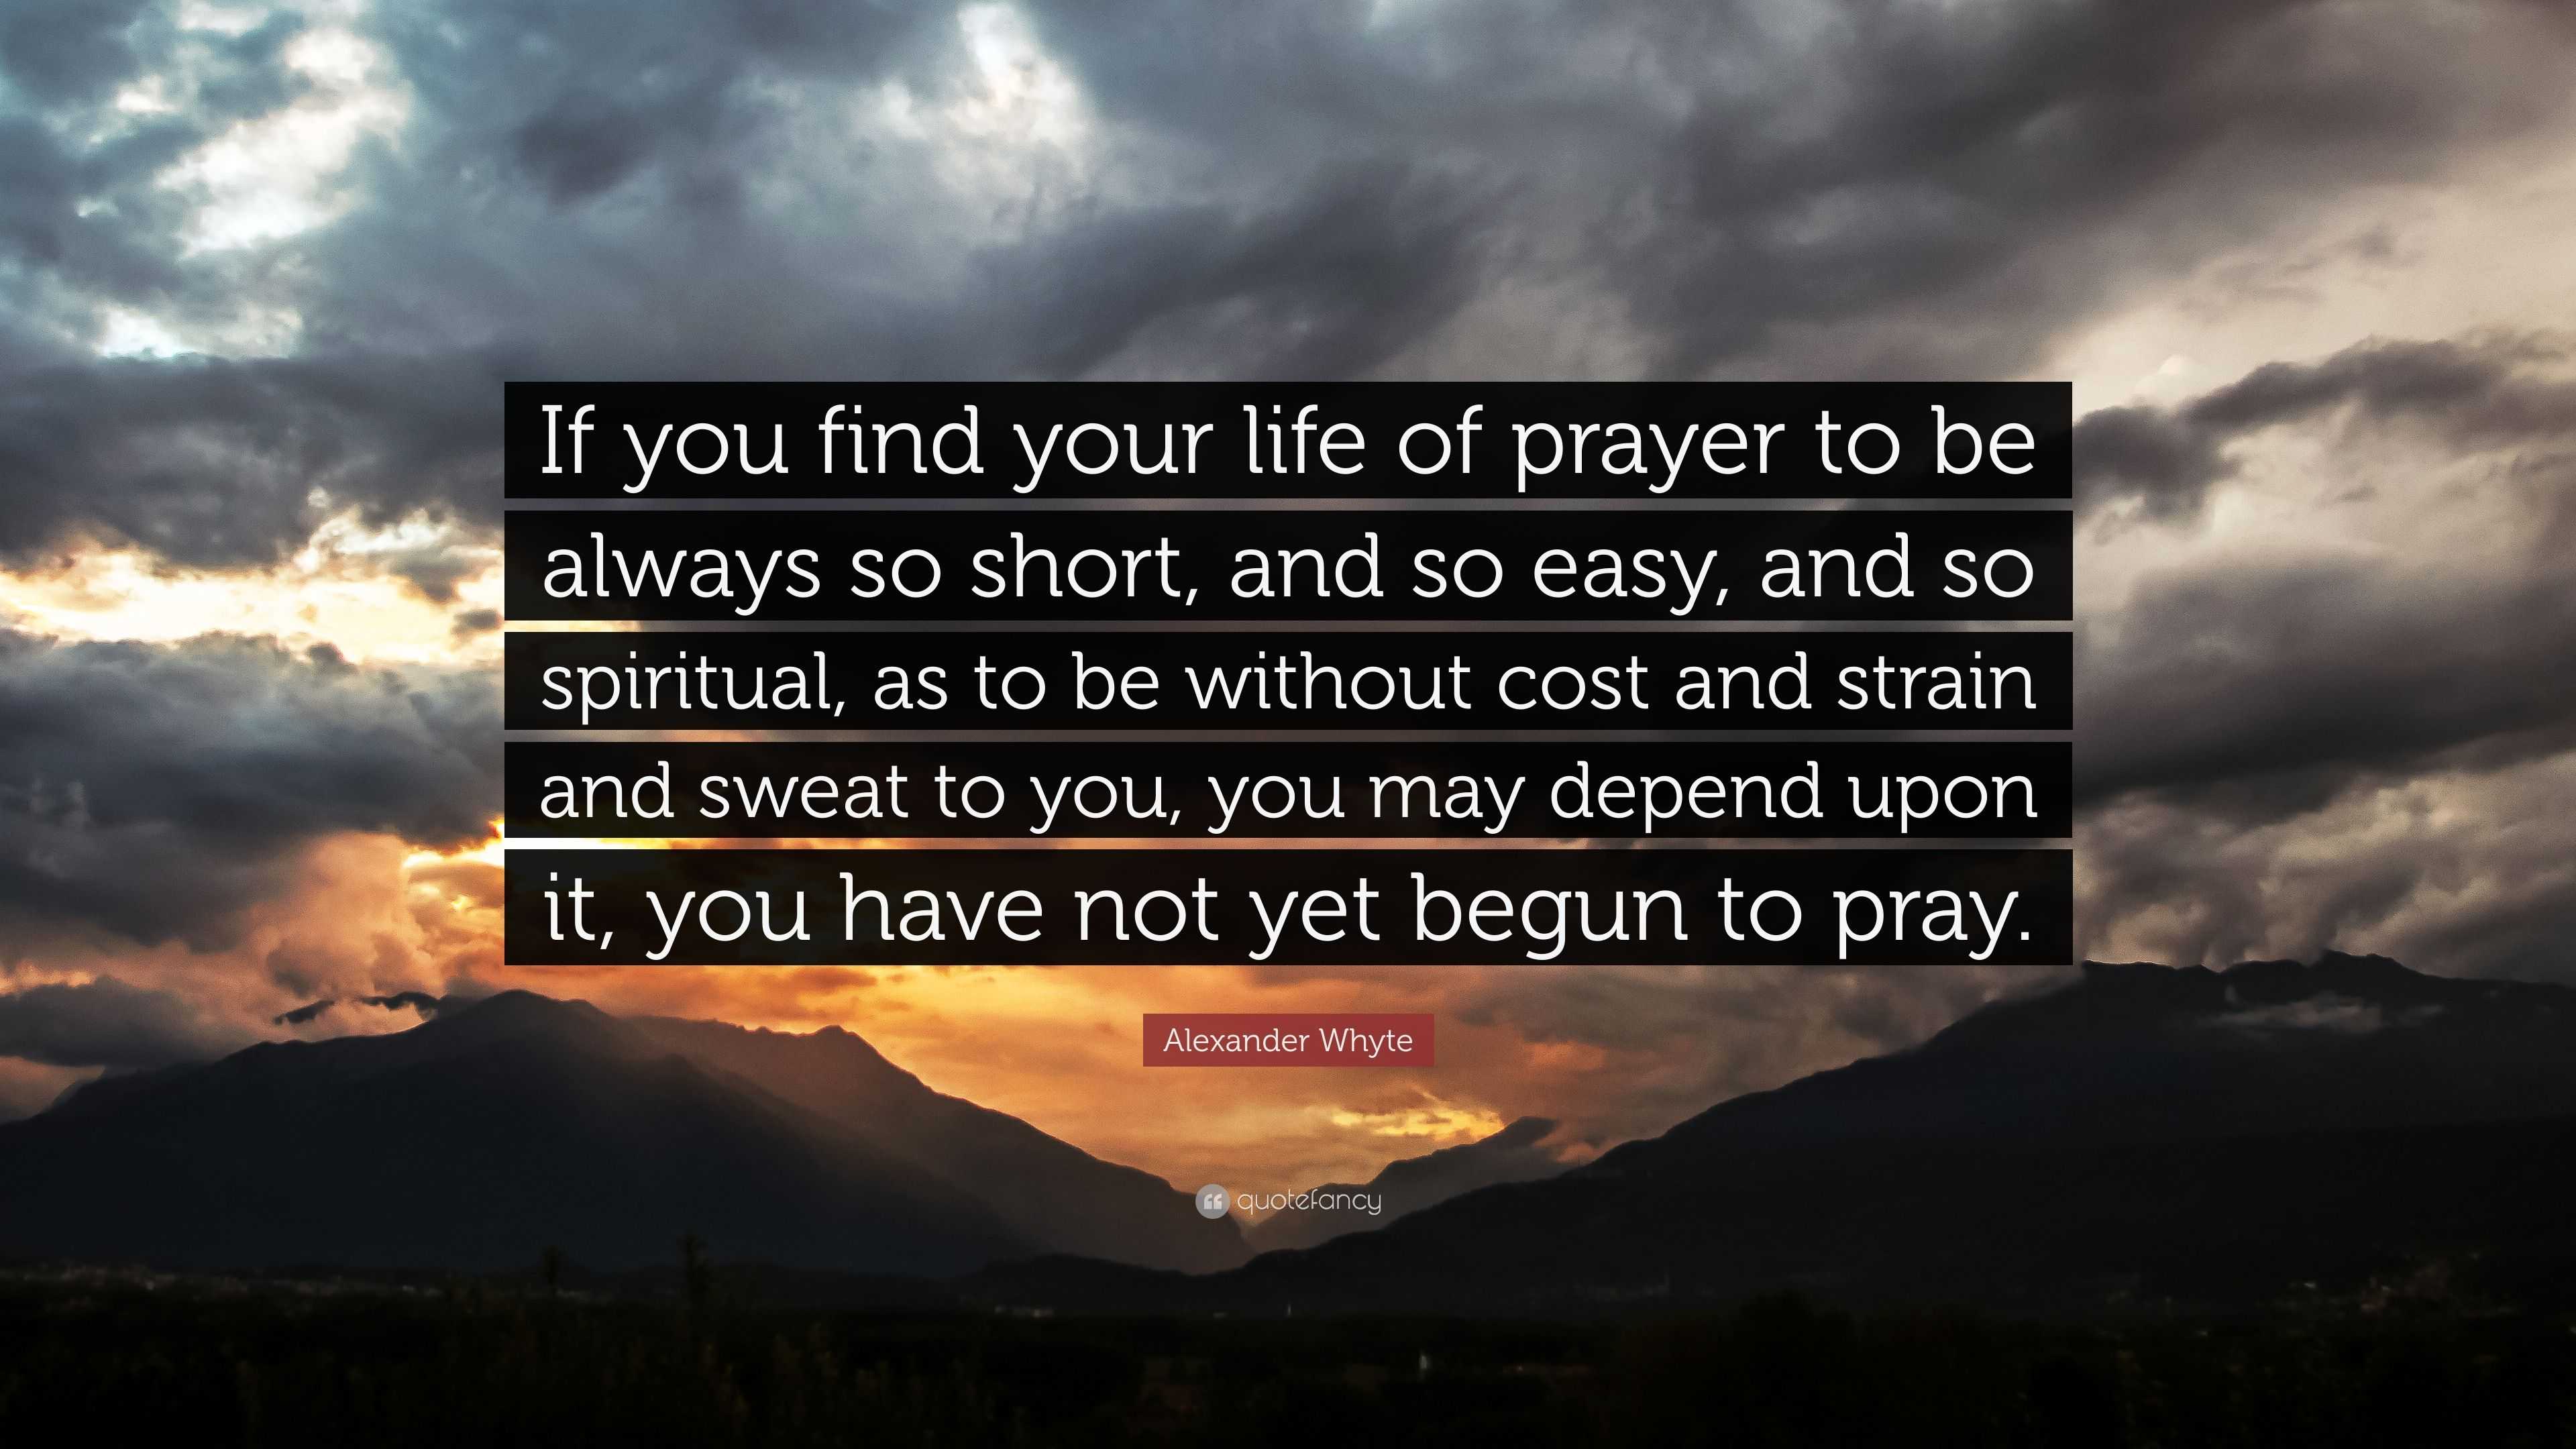 Alexander Whyte Quote: “If you find your life of prayer to be always so ...